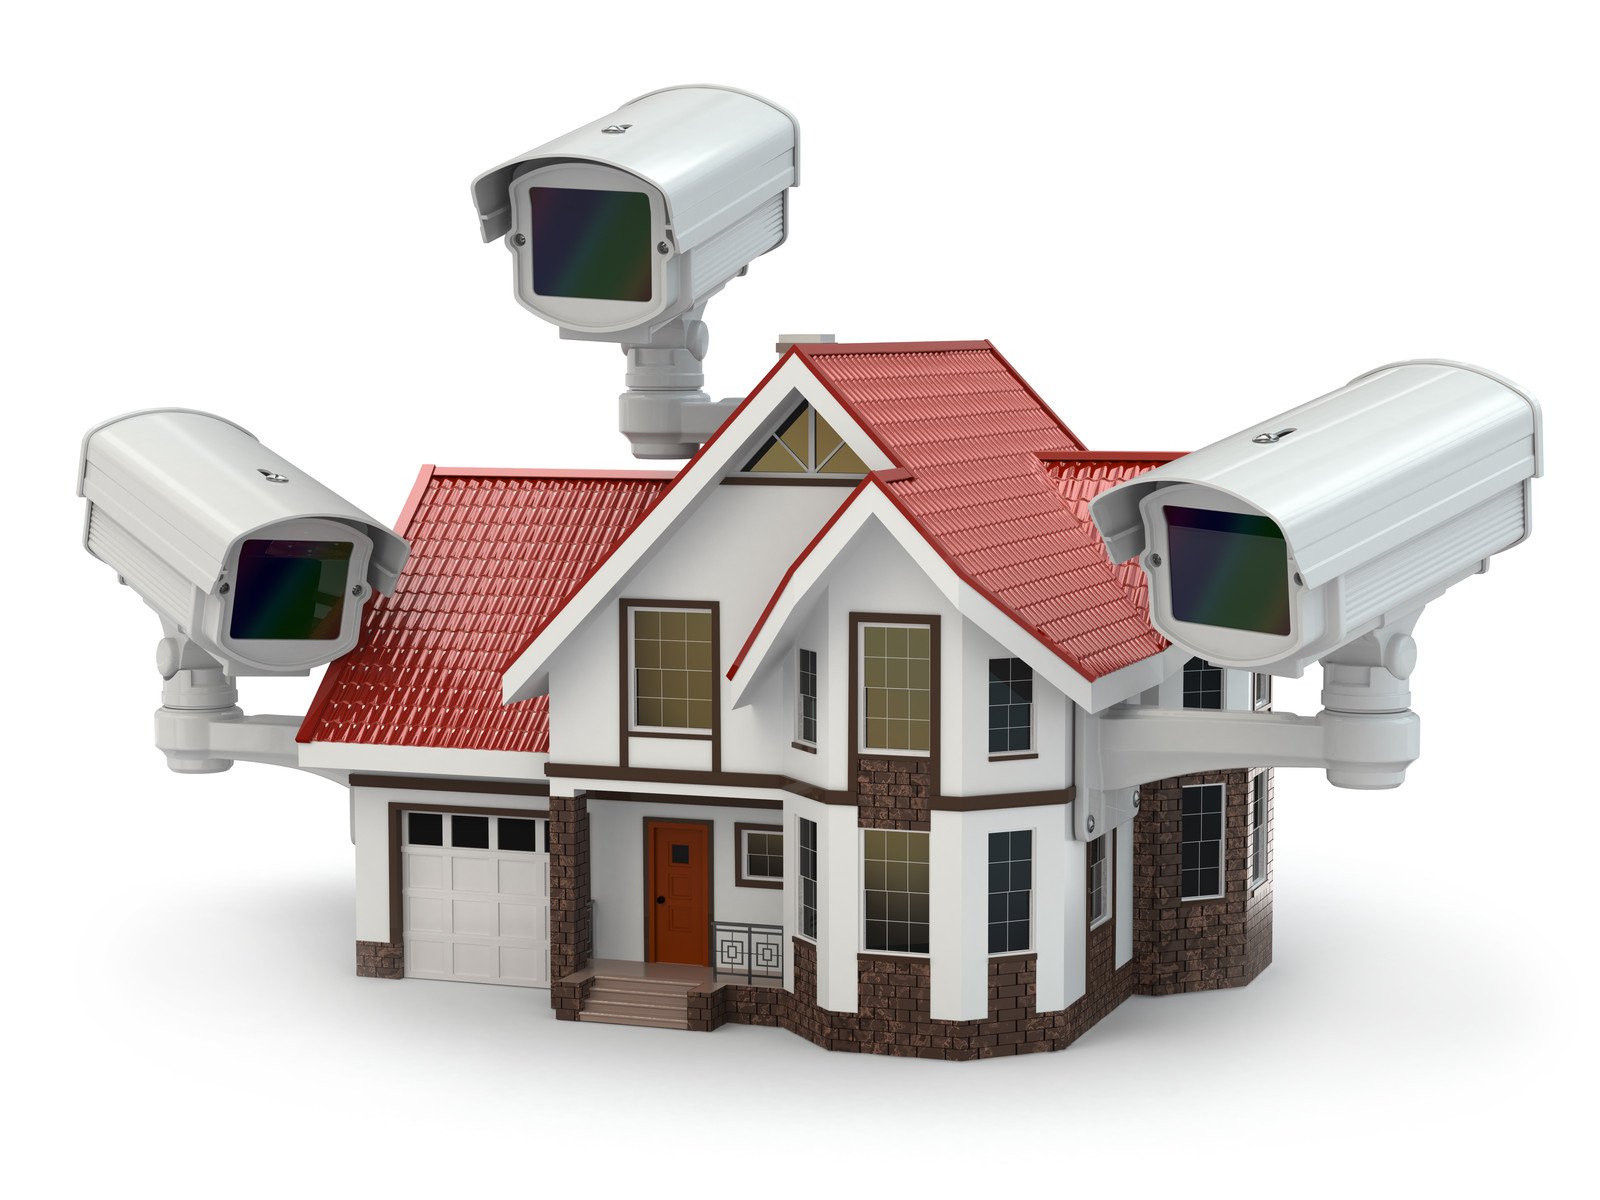 Common Mistakes to Avoid When Installing Wi-Fi Surveillance Cameras